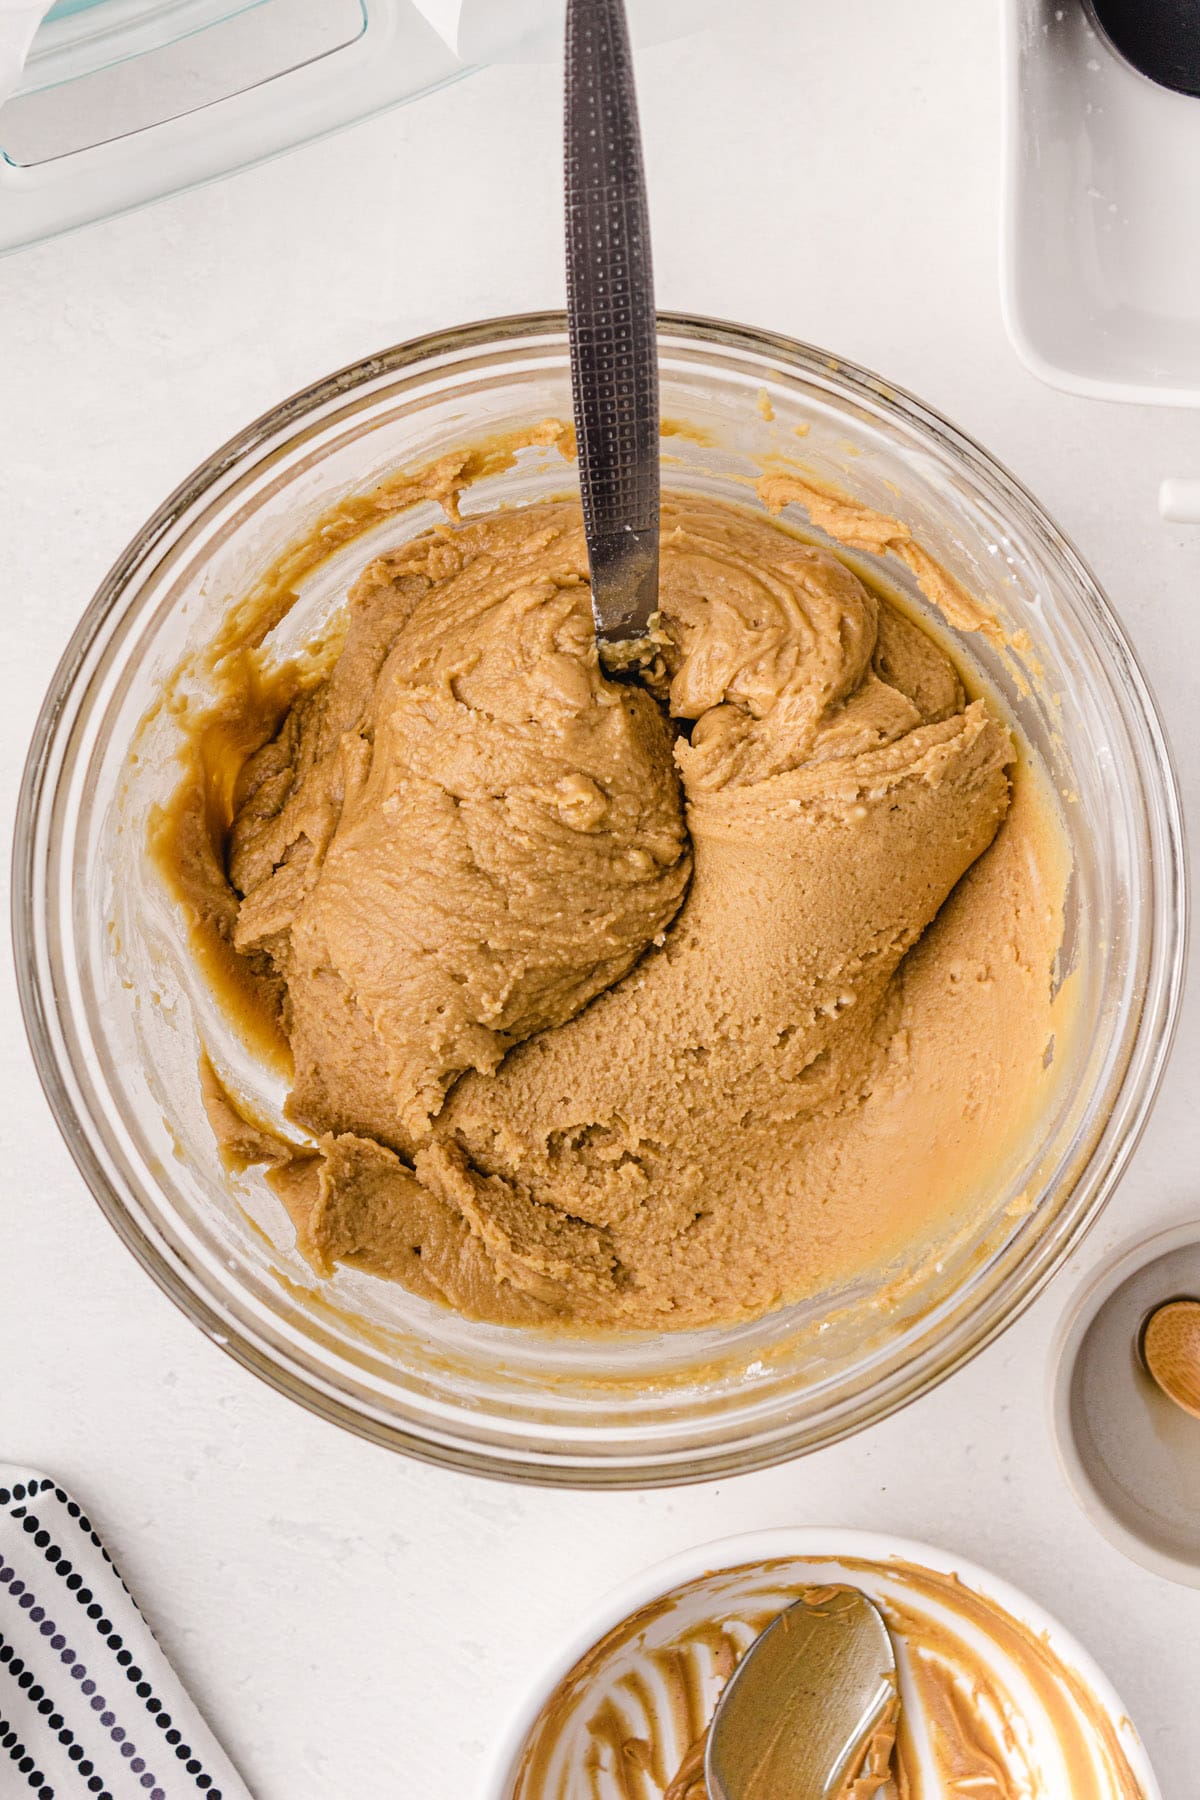 peanut butter mixture in a bowl